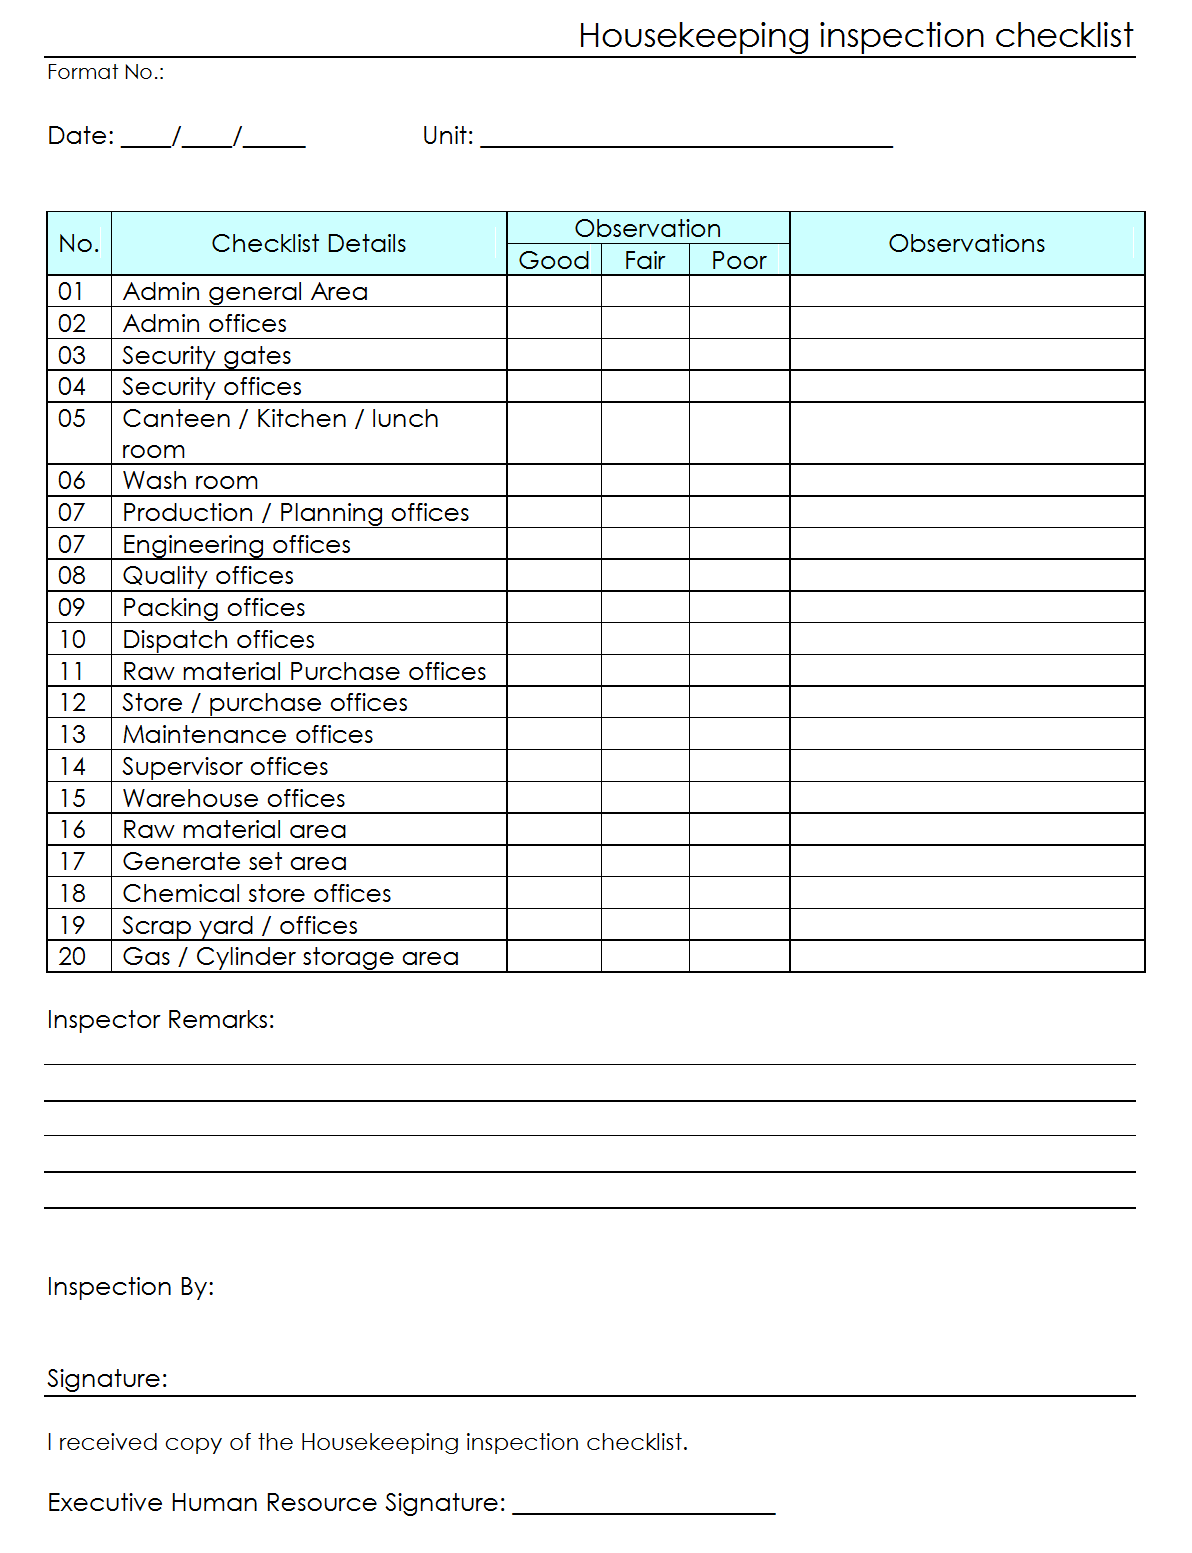 House Keeping Inspection Checklist format | Samples | Word Document